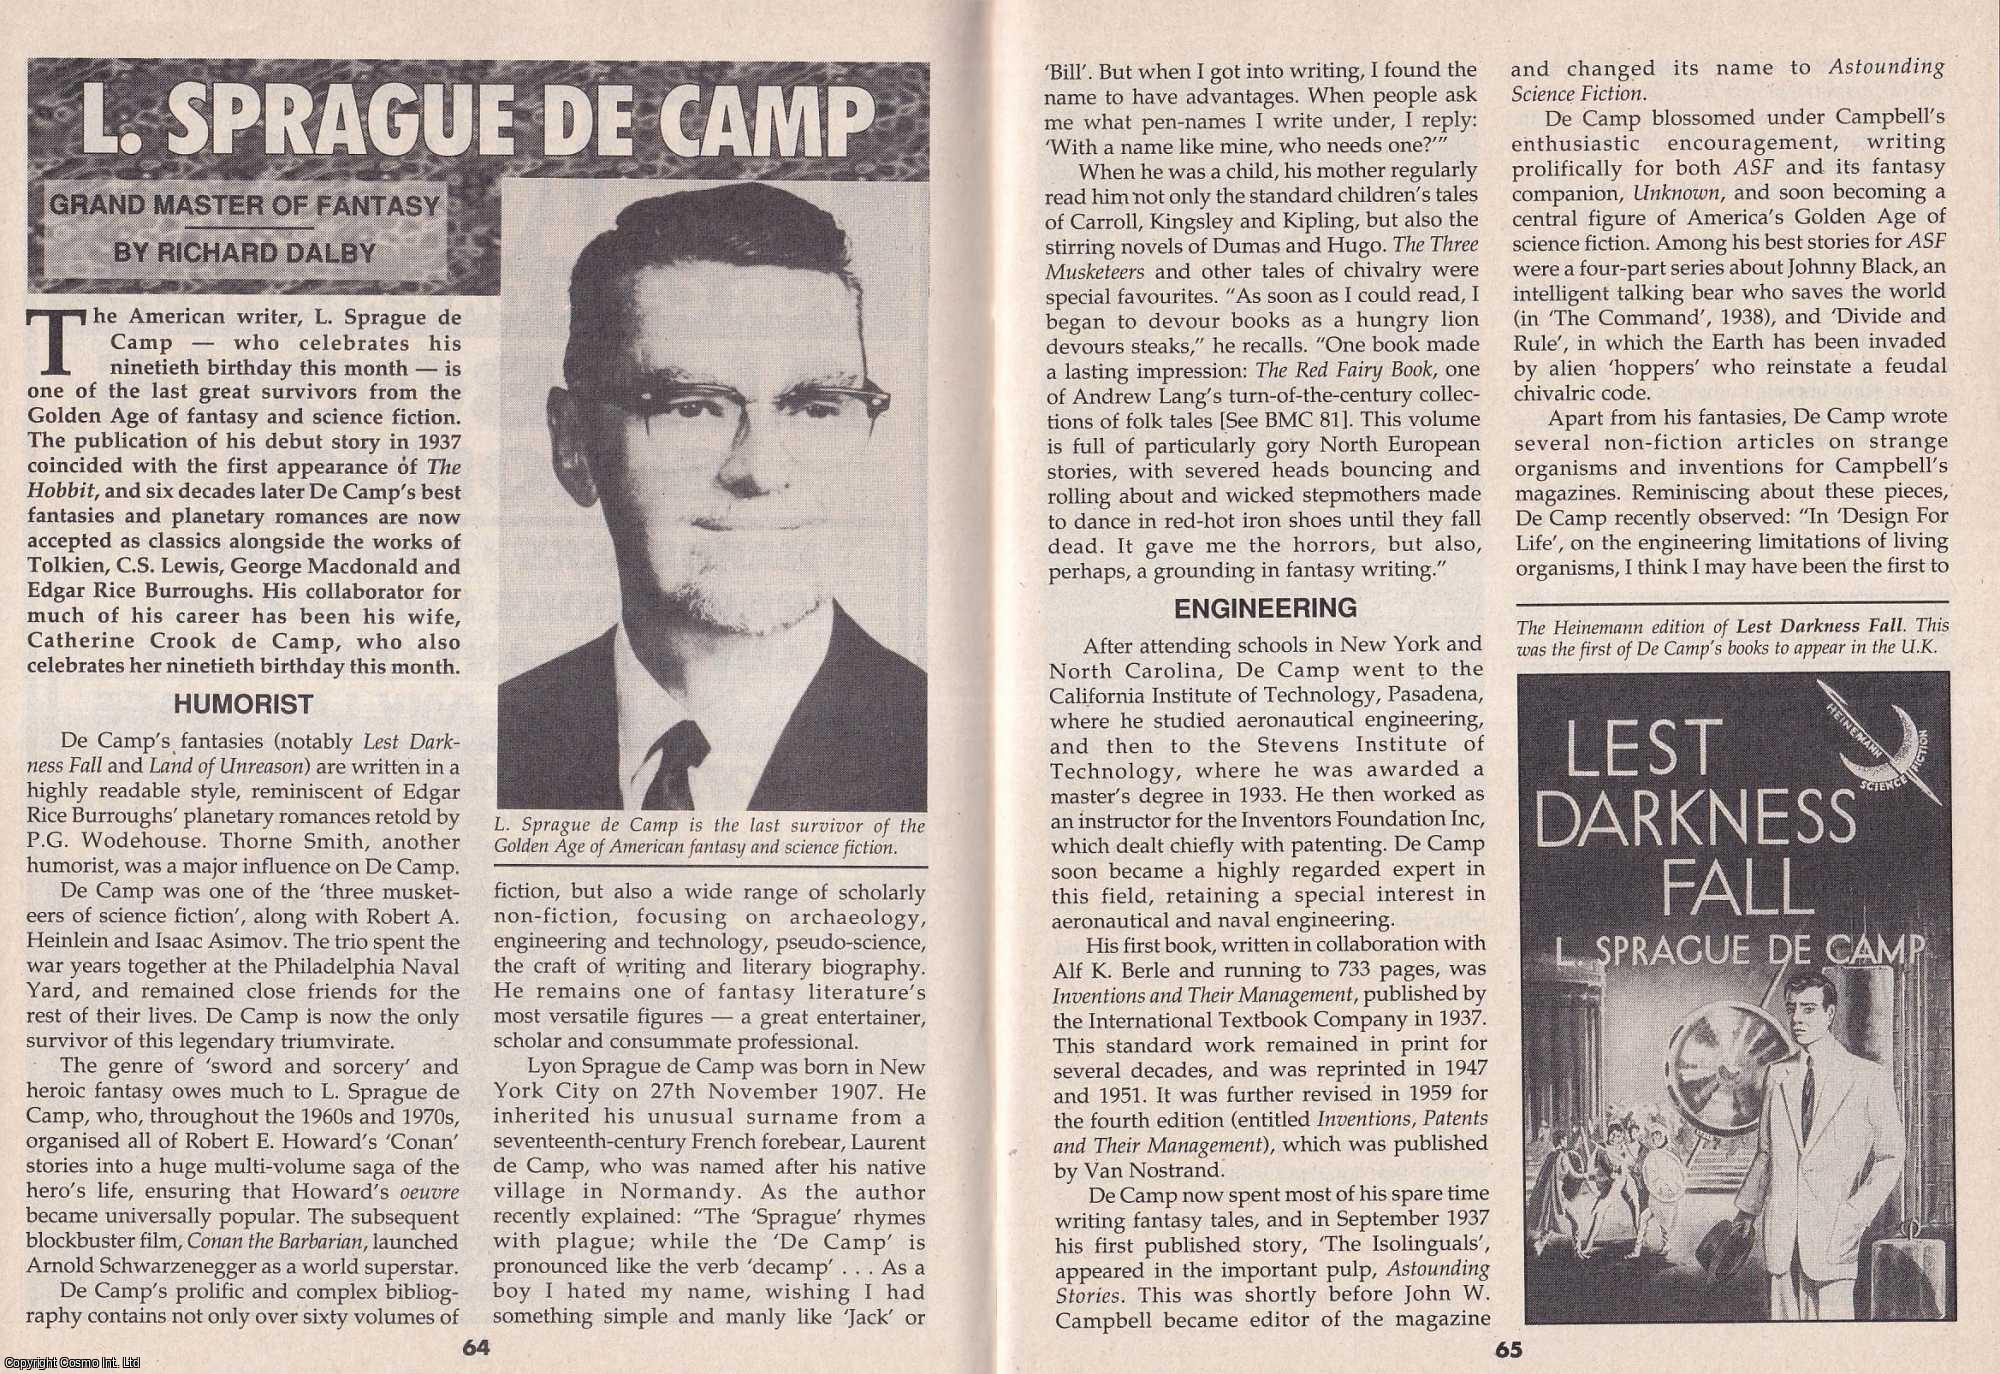 Richard Dalby - L. Sprague De Camp. Grand Master of Fantasy. This is an original article separated from an issue of The Book & Magazine Collector publication.